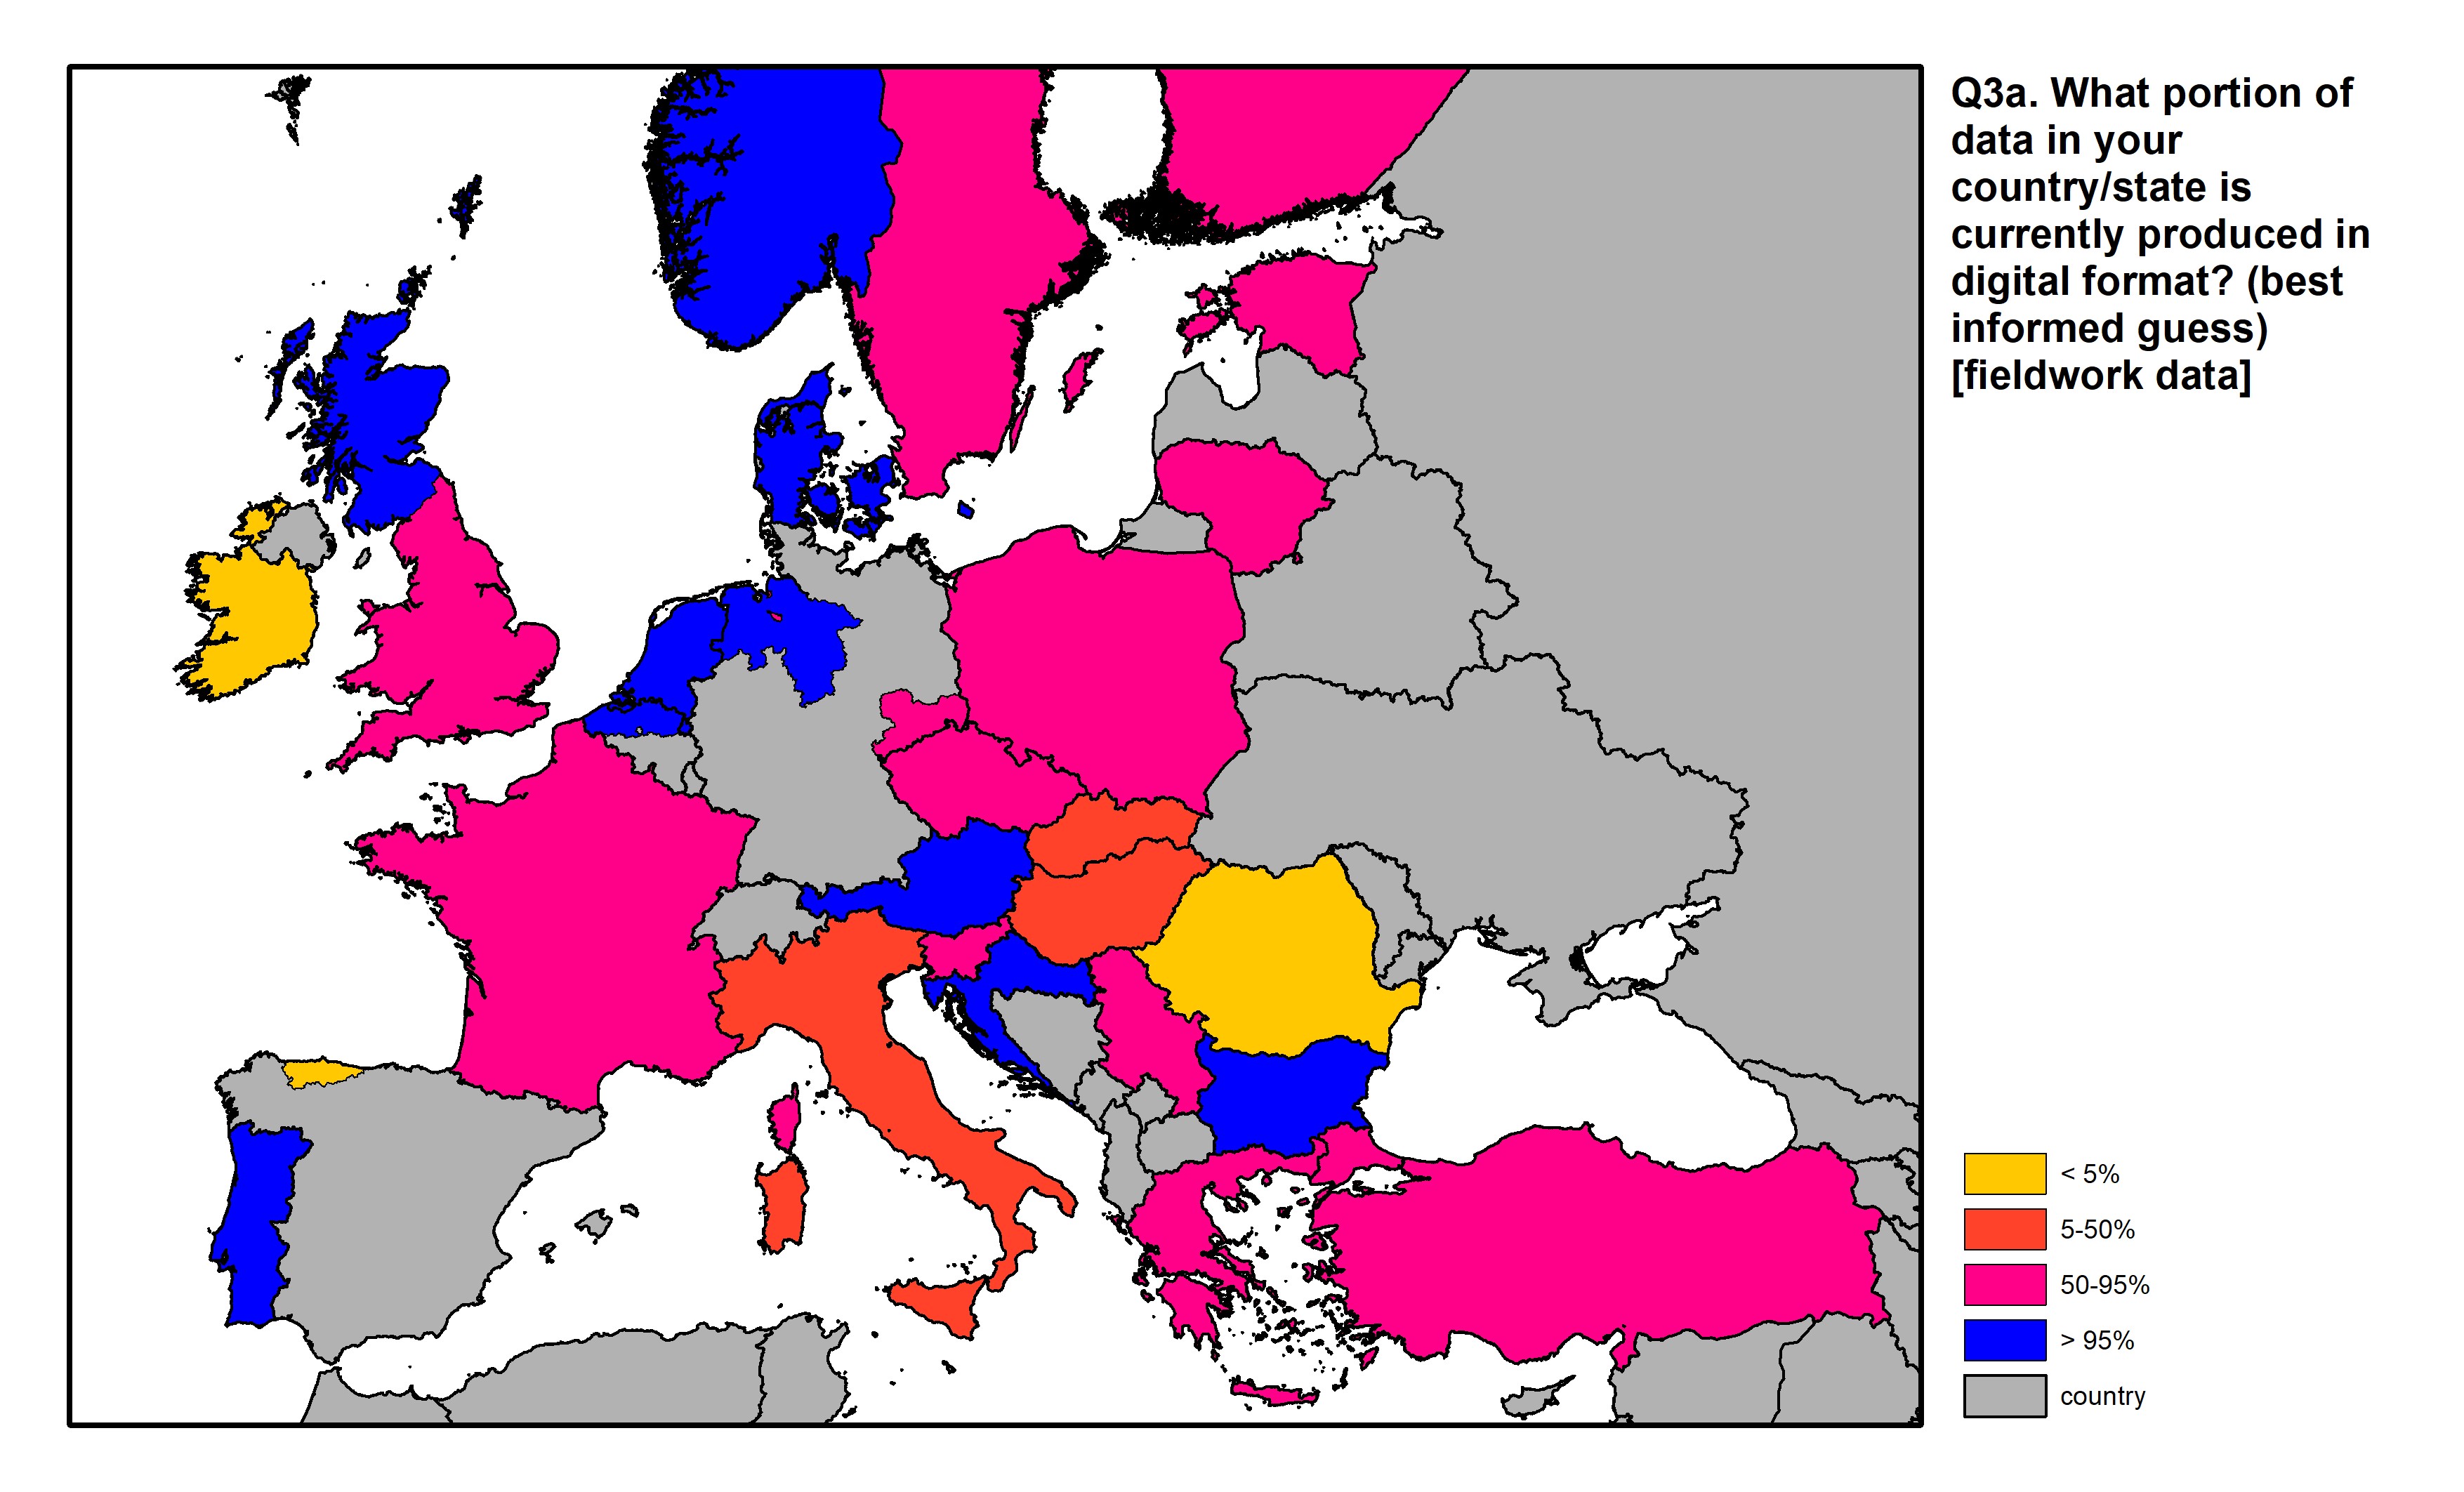 Figure 8: a map of Europe showing countries and regions in colour based on response rates to the survey question.